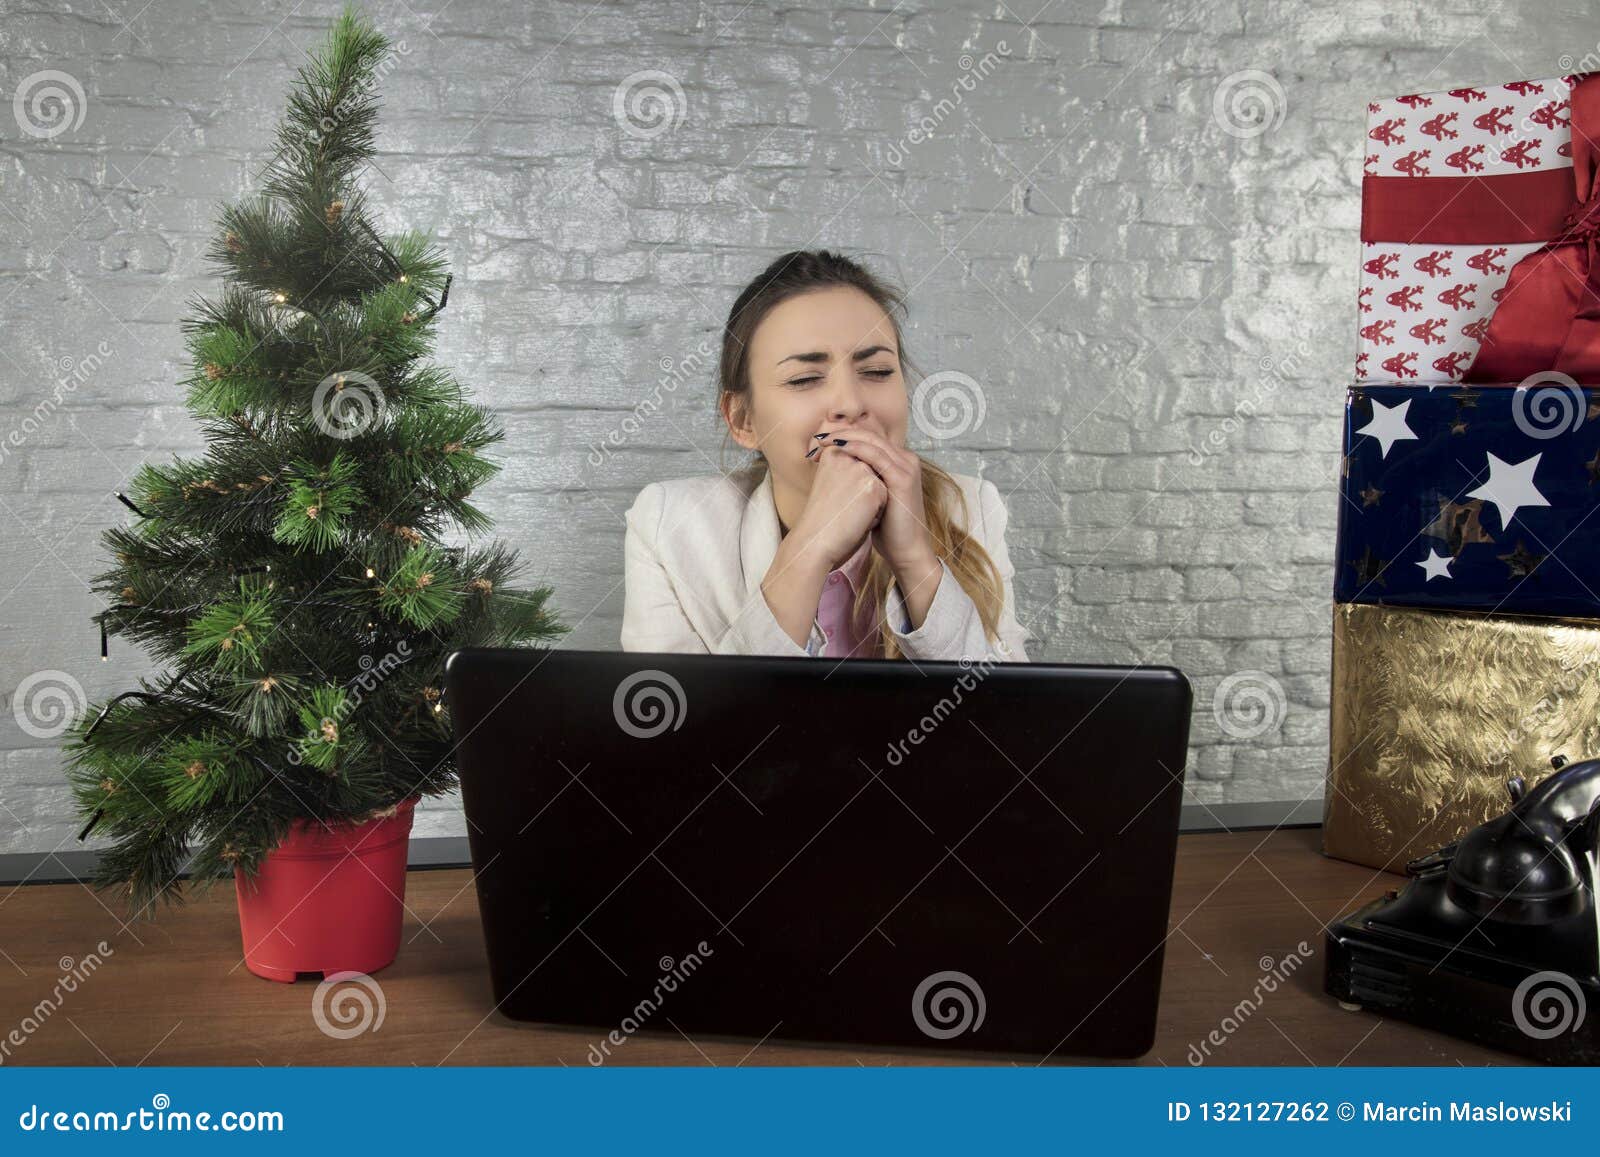 business woman yawns at work, overtired organism